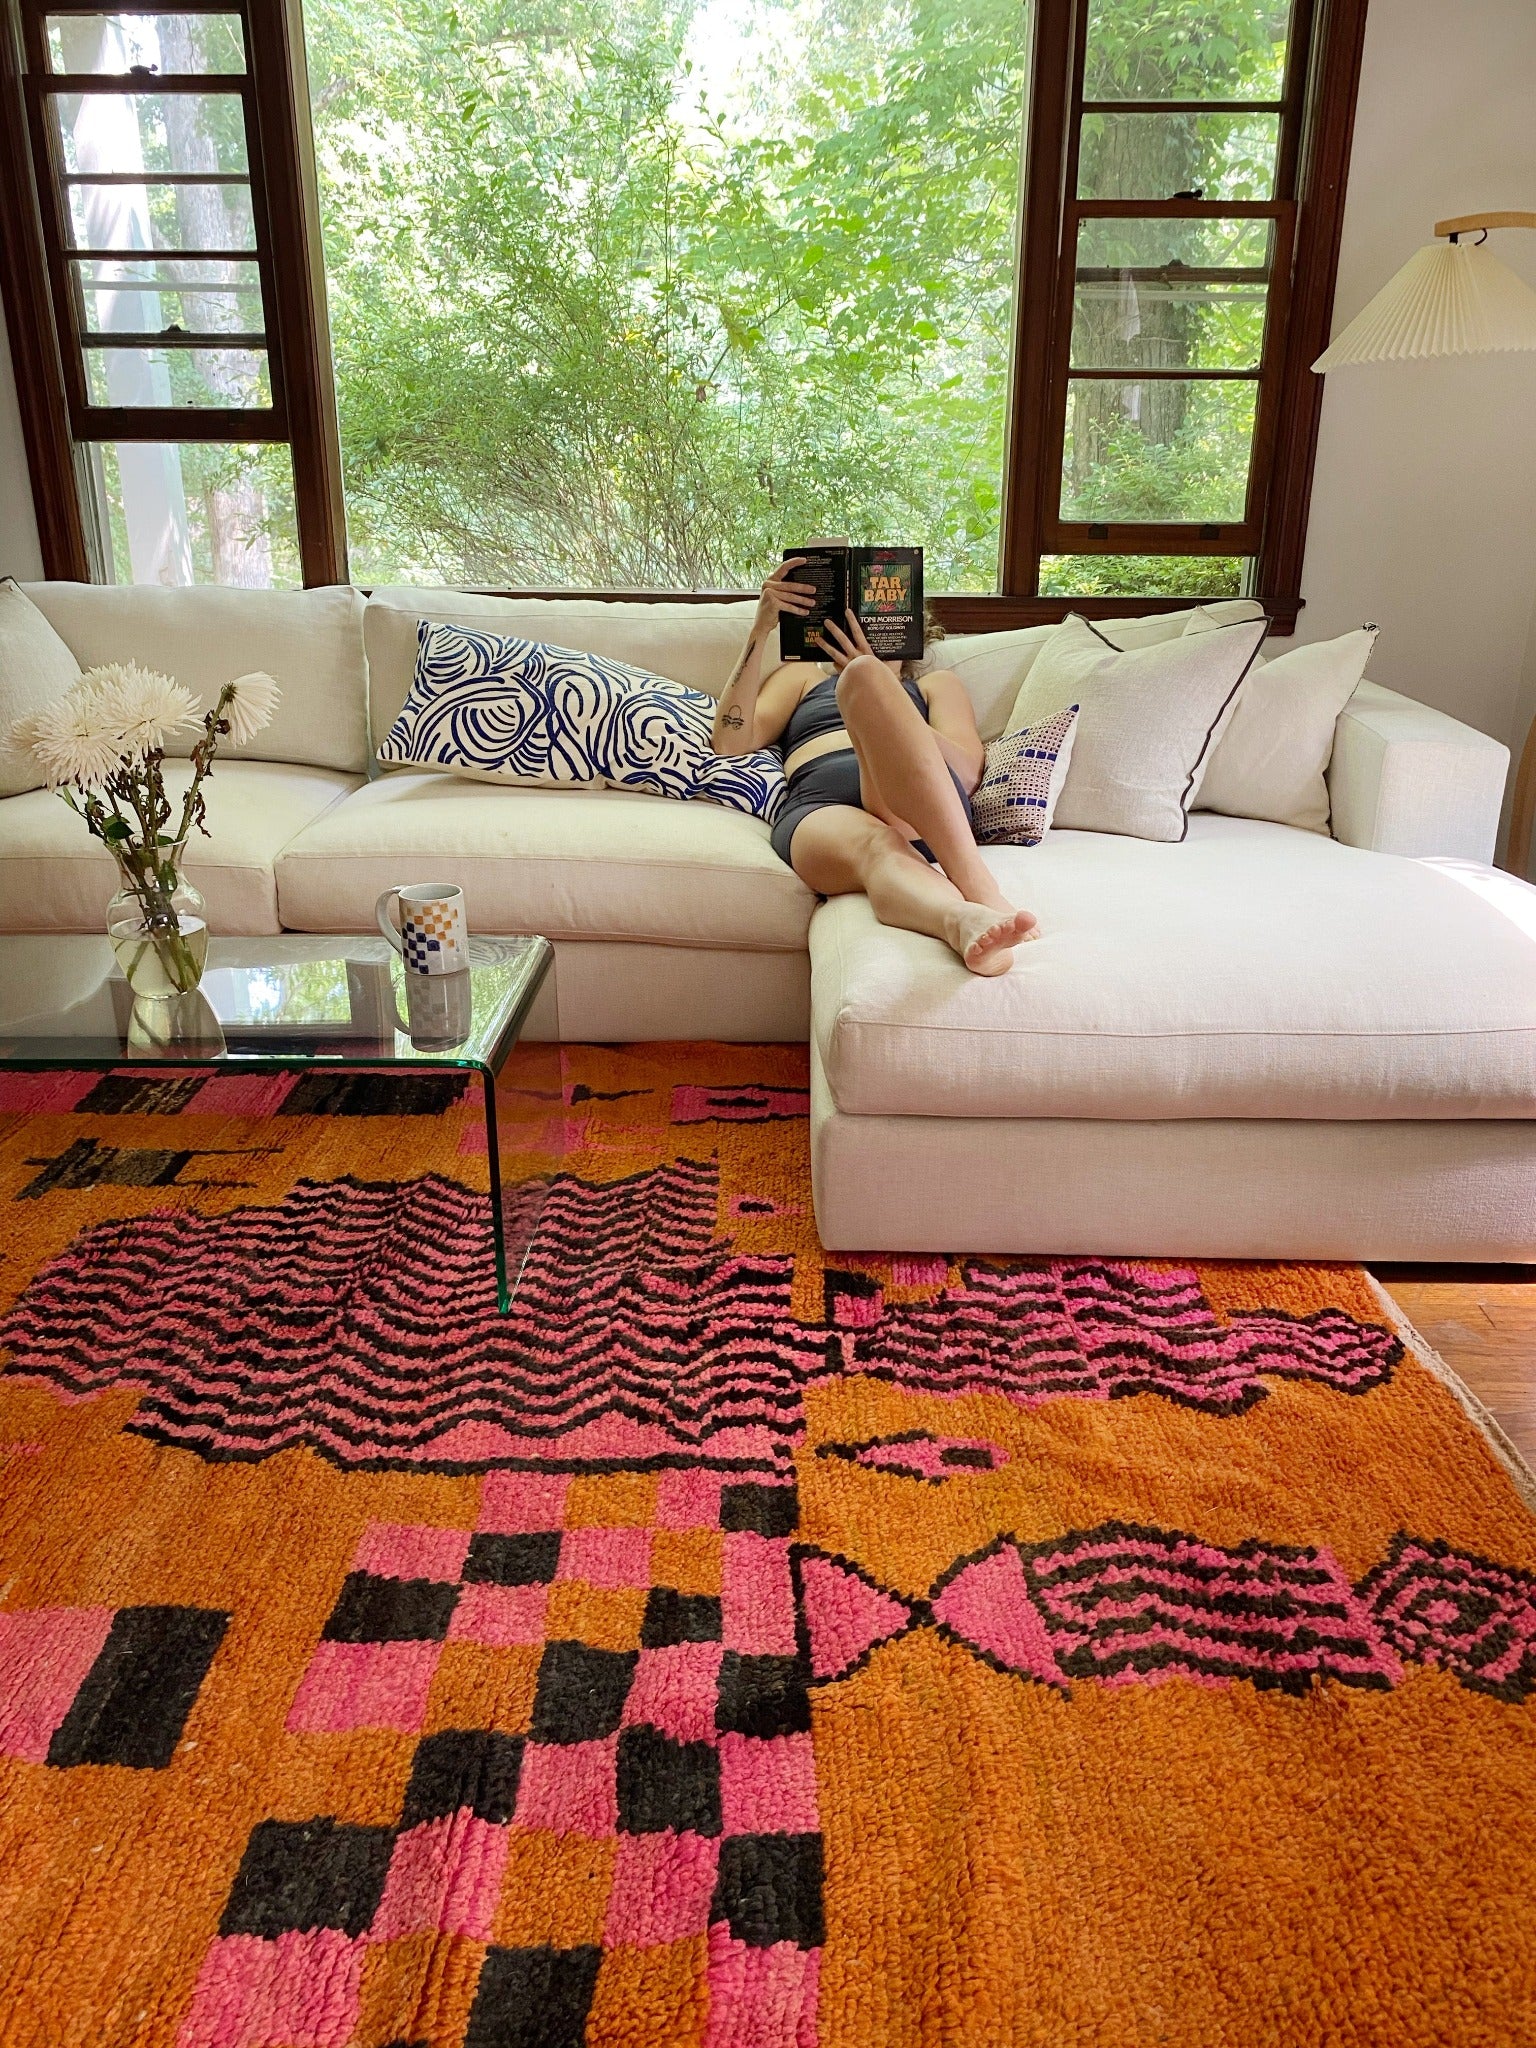 A bright tangerine and hot pink rug add so much character and depth to a living space.